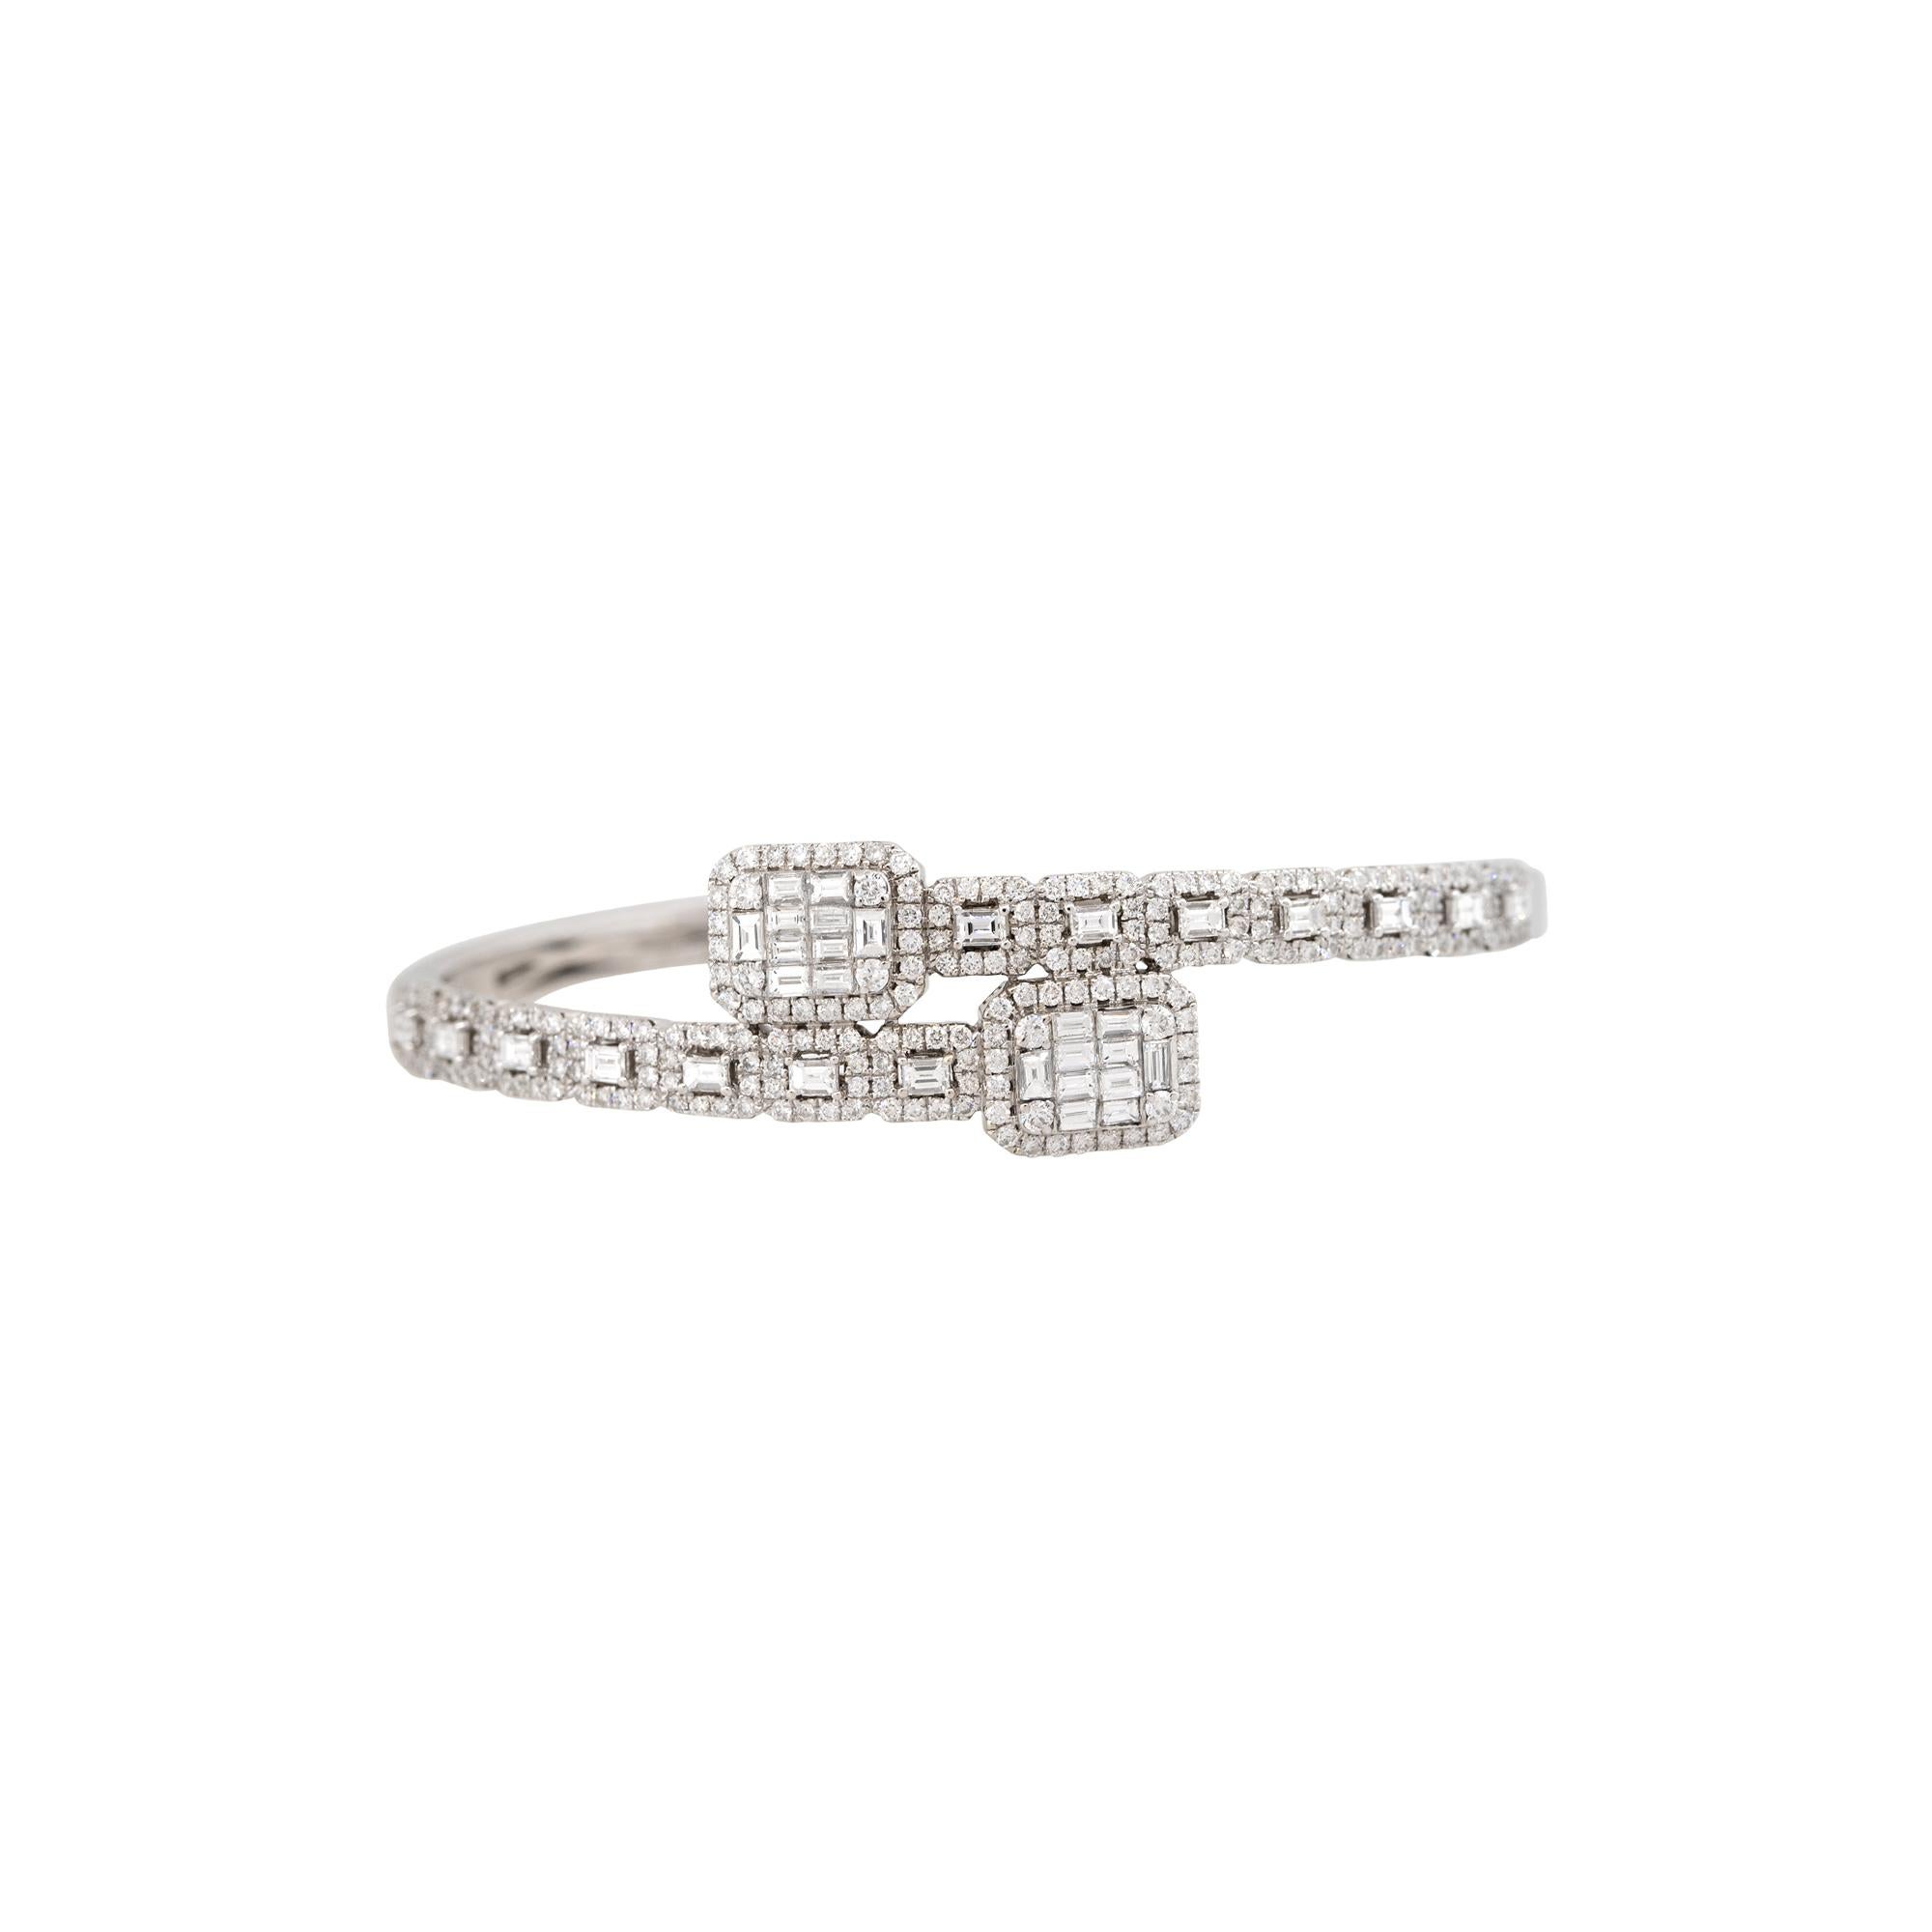 Everyone should take notice of this diamond bypass cuff bracelet! With approximately 4.05 carats of round brilliant, baguette and emerald cut diamonds, this bracelet offers a cool and trendy look. Not only are there multiple cuts of diamonds, but